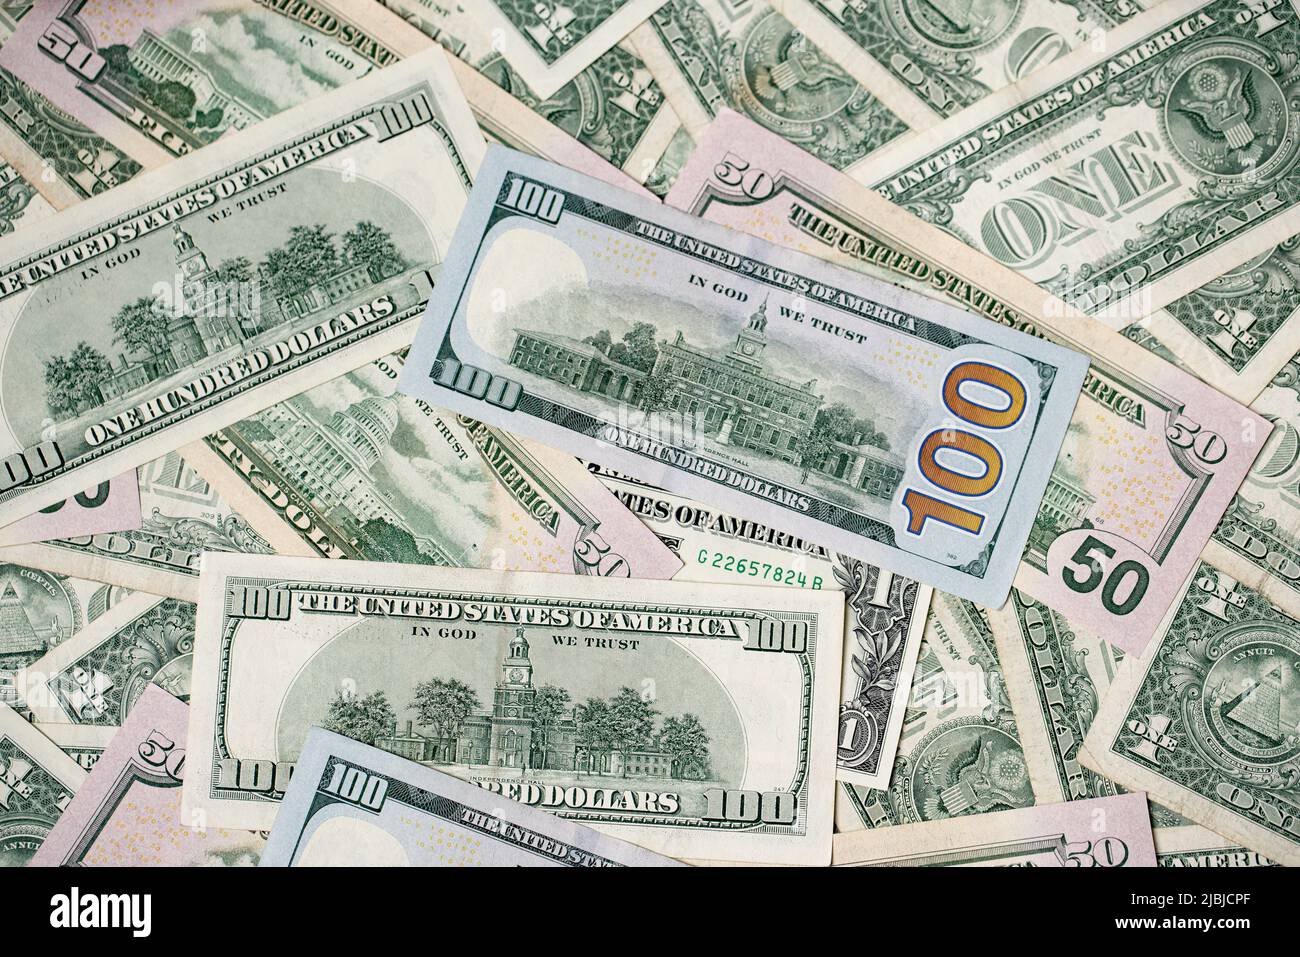 US dollar banknotes as background. One hundred dollar bills spread out. Fifty and 100 USD paper bills Stock Photo